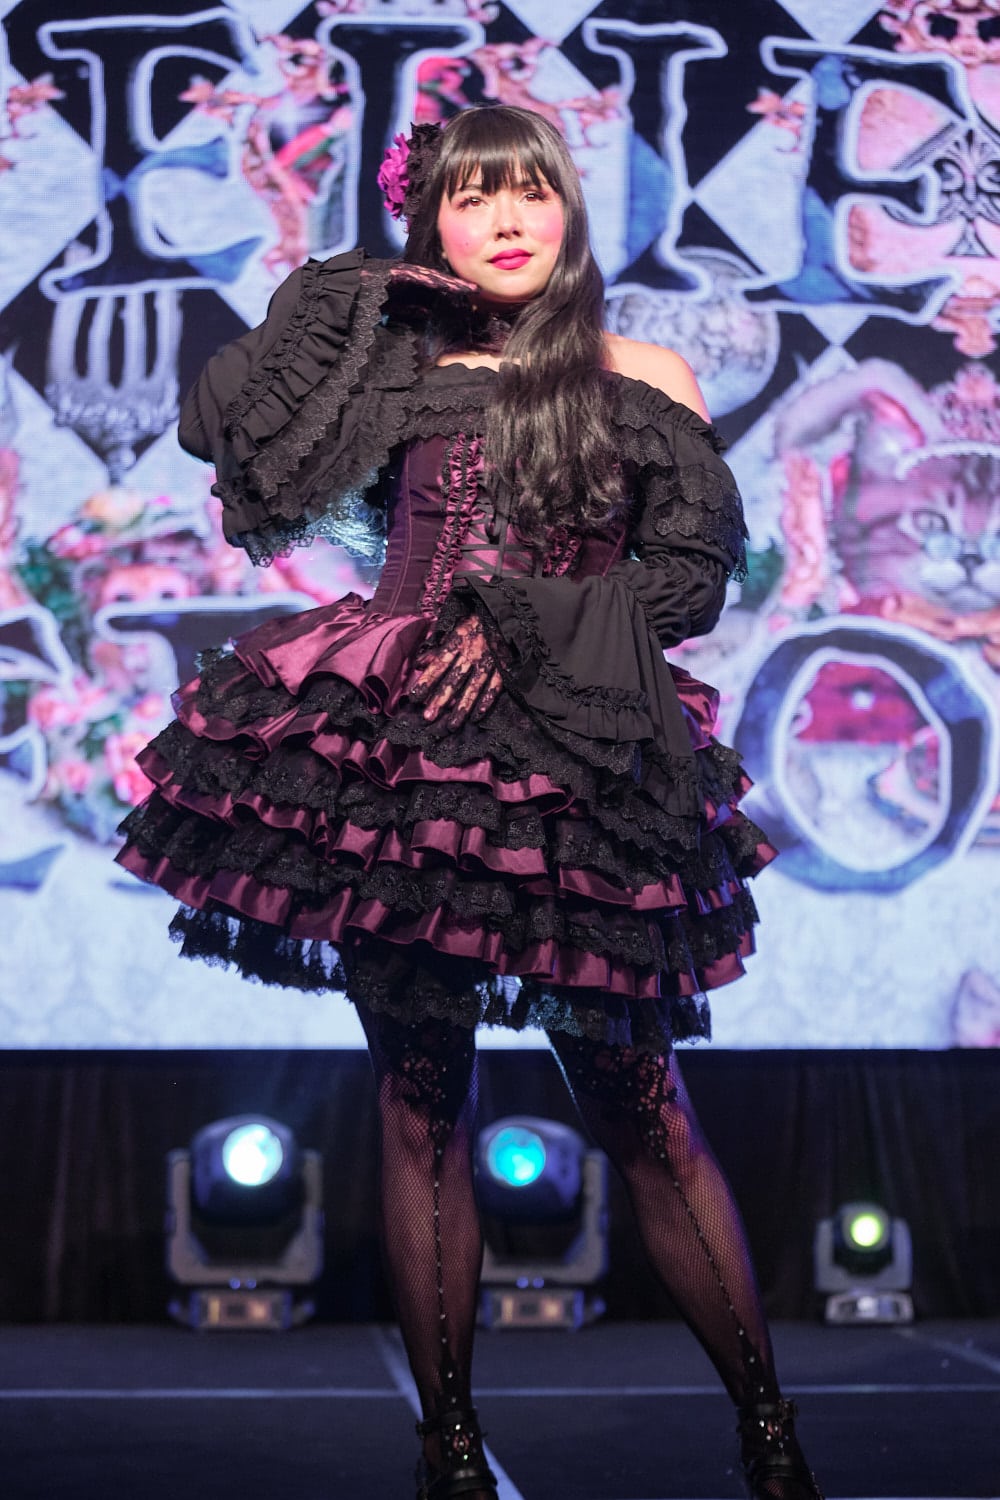 Purple and black gothic lolita outfit - full body 2.